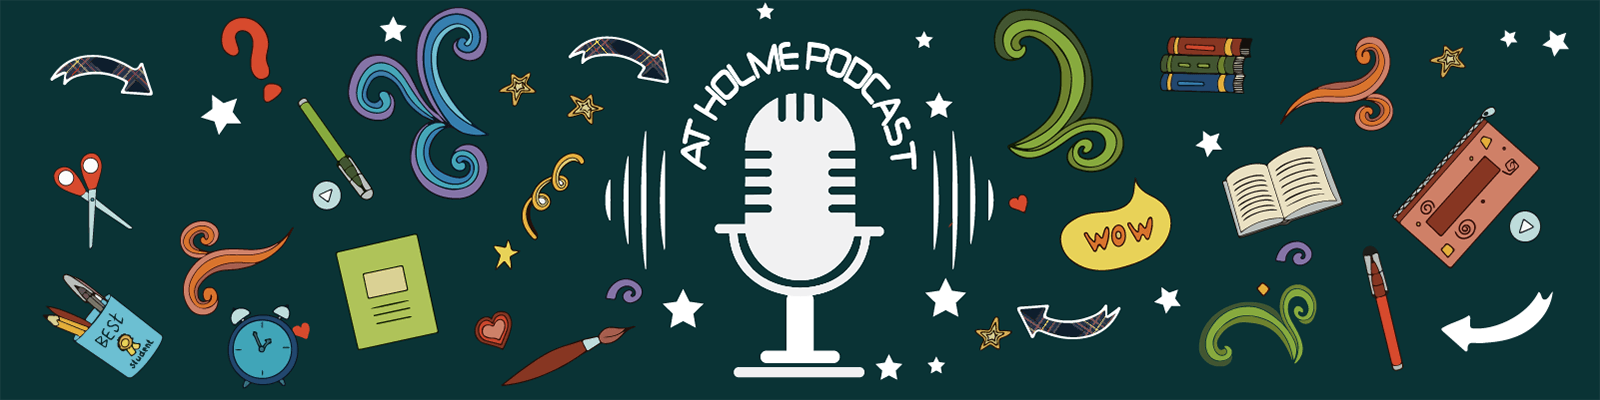 At Holme - Fairholme Podcasts